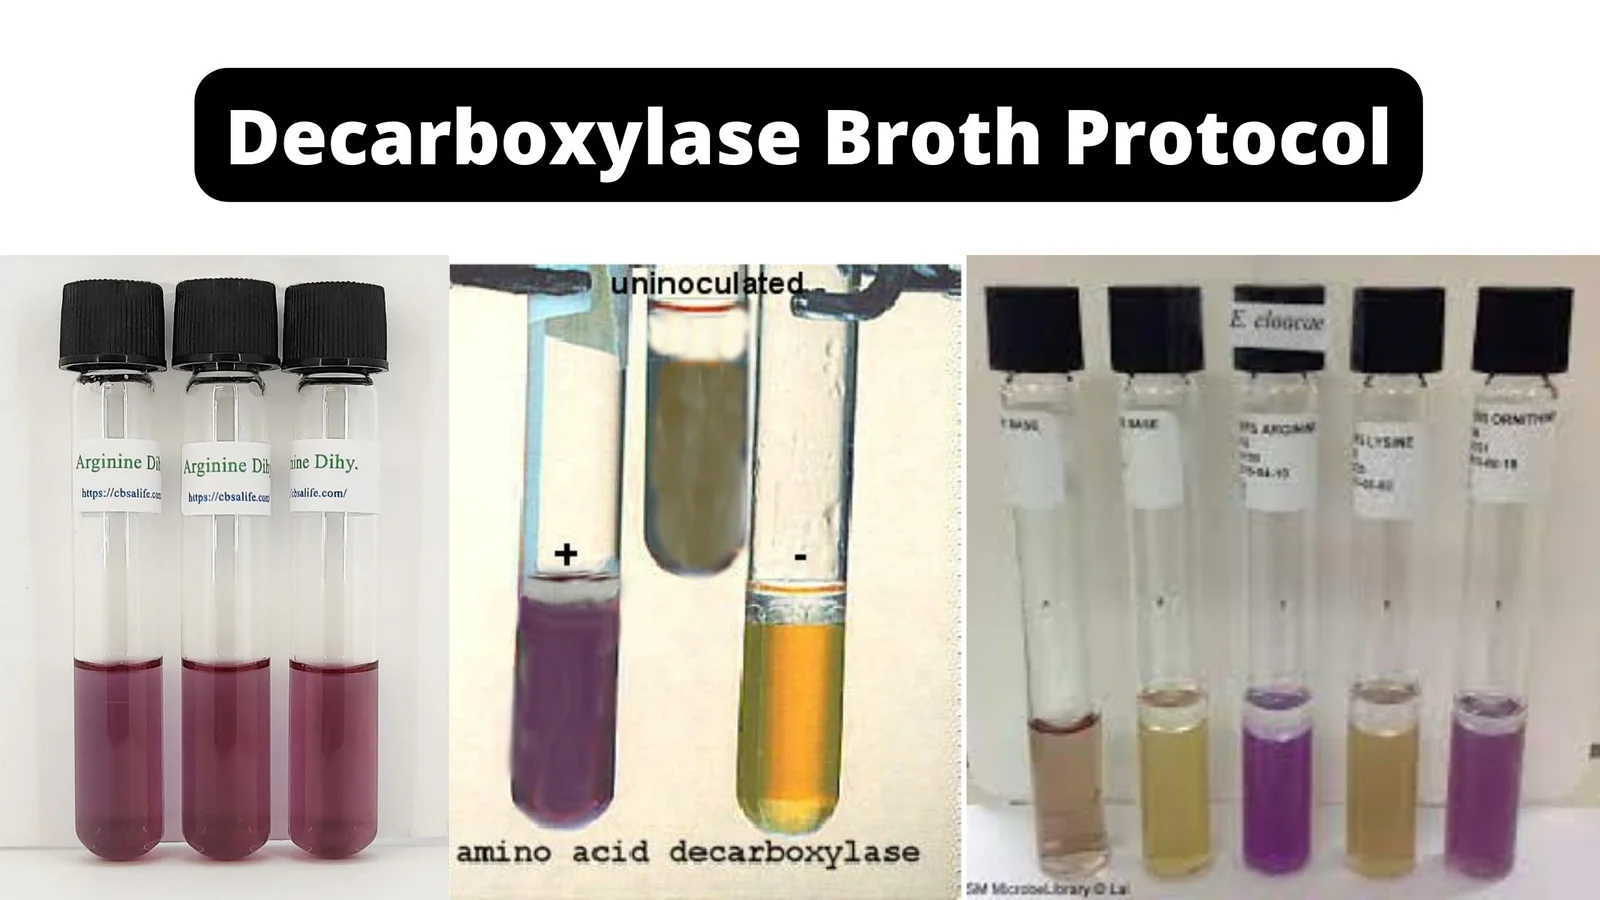 Decarboxylase Broth Protocol